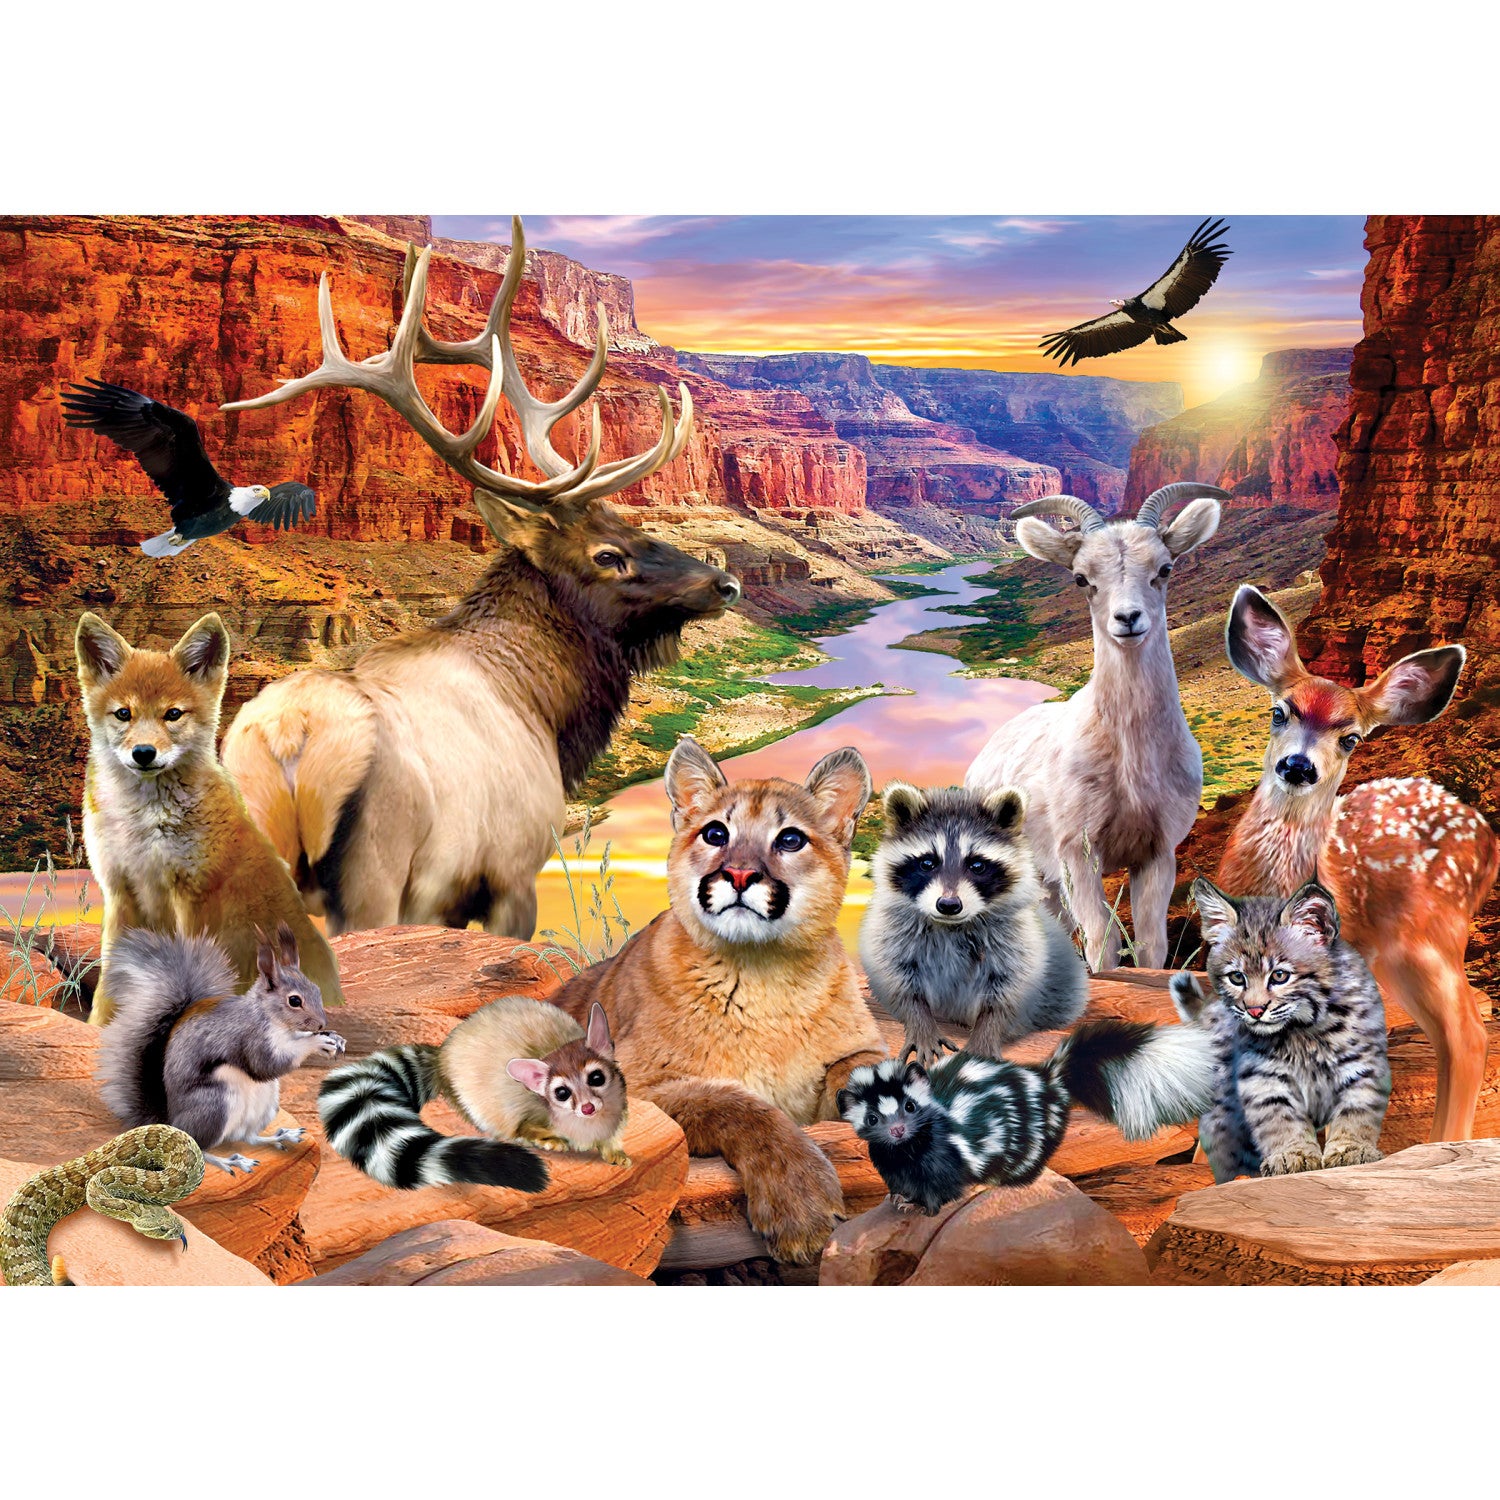 National Parks - Grand Canyon 500 Piece Puzzle